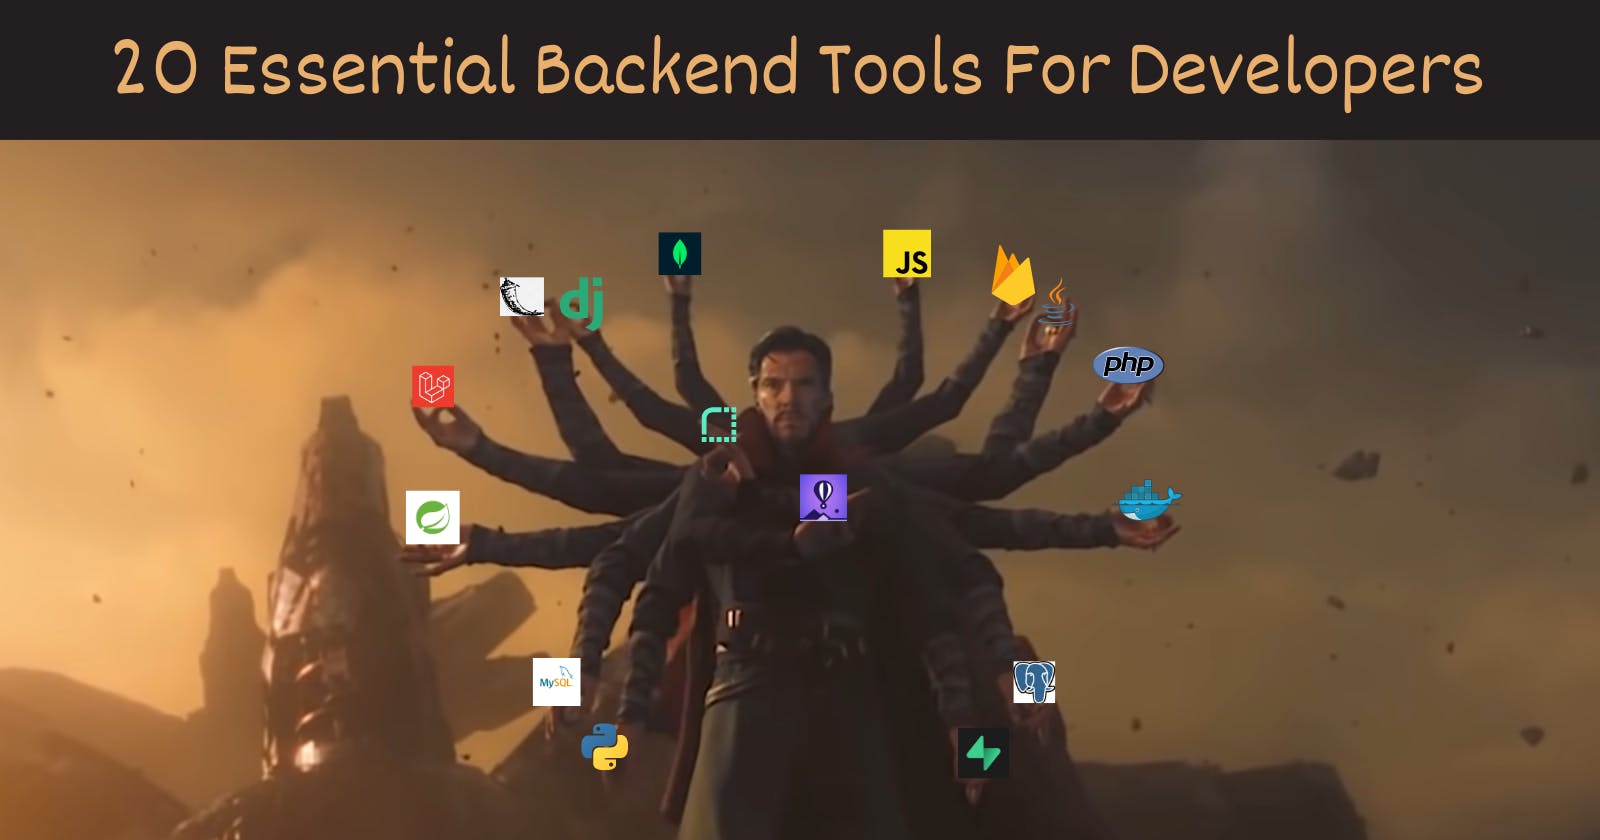 20 Essential Backend Tools For Developers